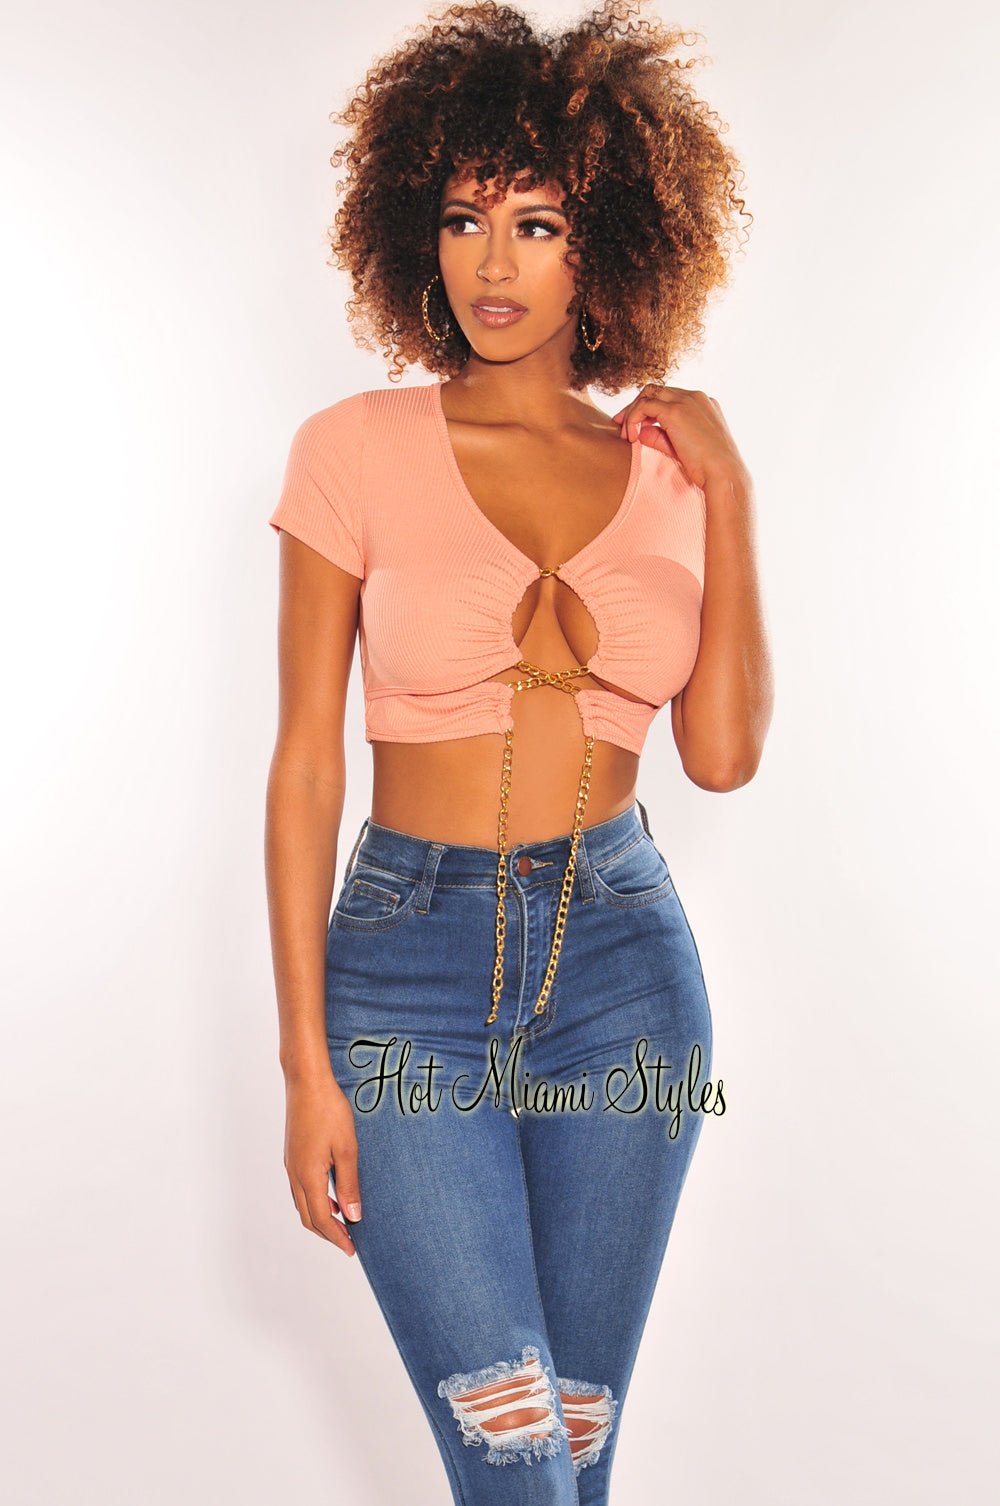 TVstation Åre Skråstreg Peach Gold Chain Ribbed Lace Up Cut Out Crop Top - Hot Miami Styles